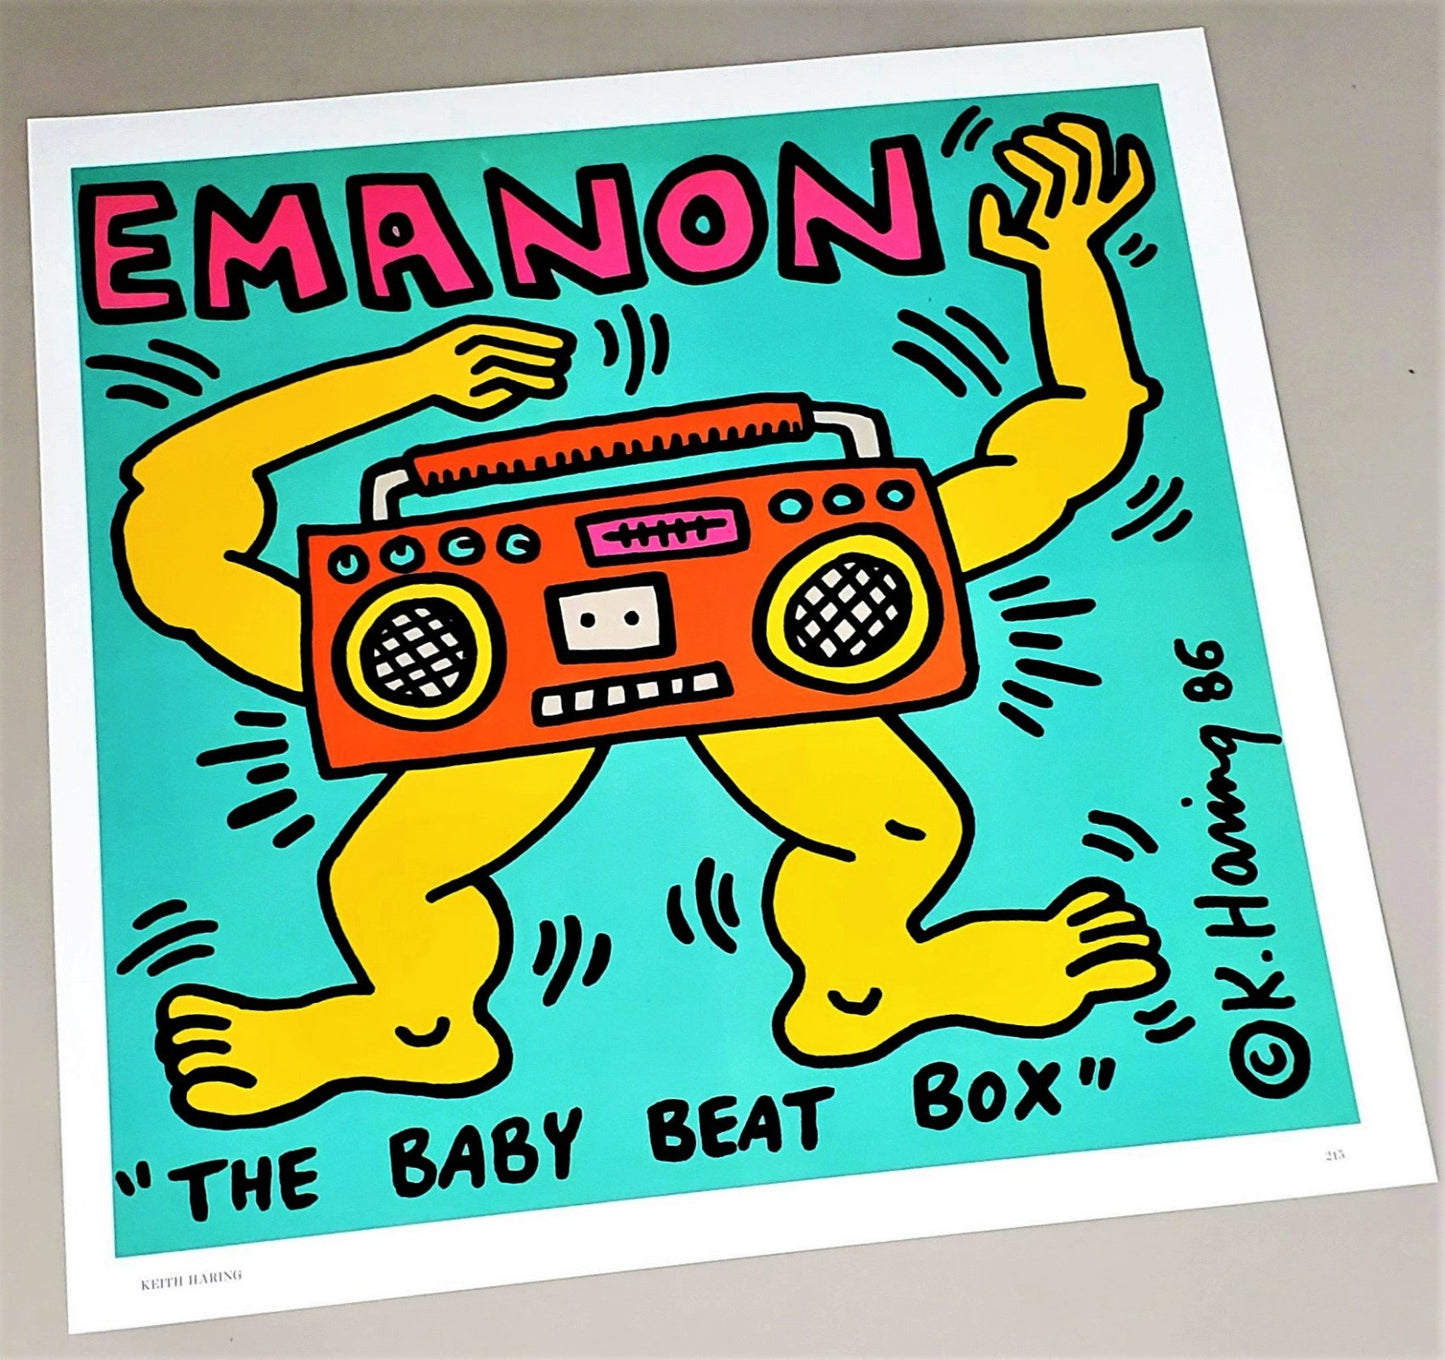 MC Chill and Emanon (The Baby Beatbox) 1986 cover featured in 2017 Art Record Covers